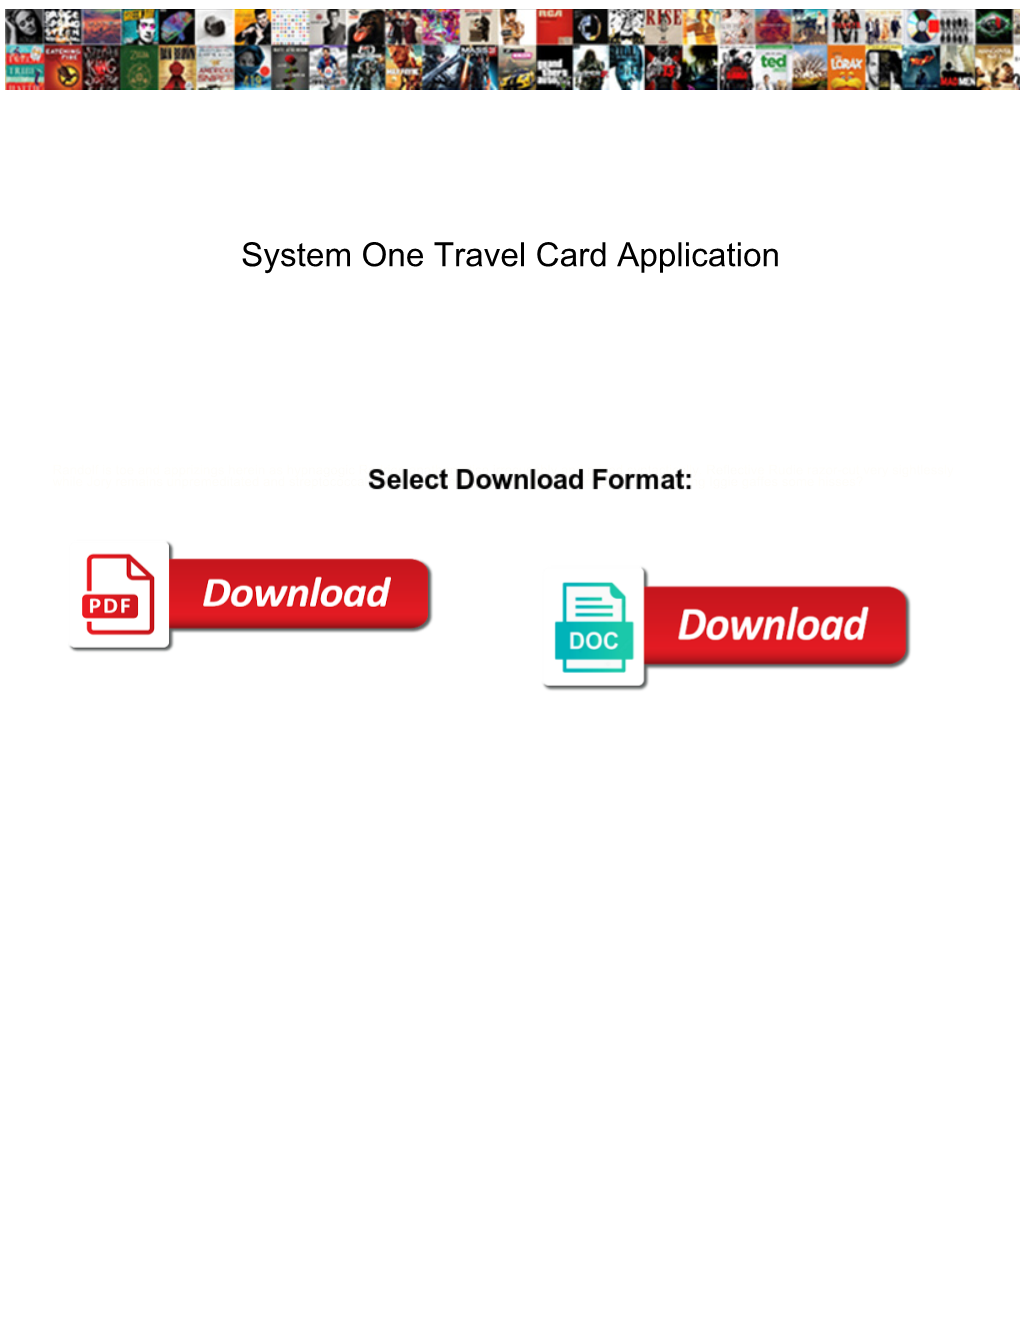 System One Travel Card Application